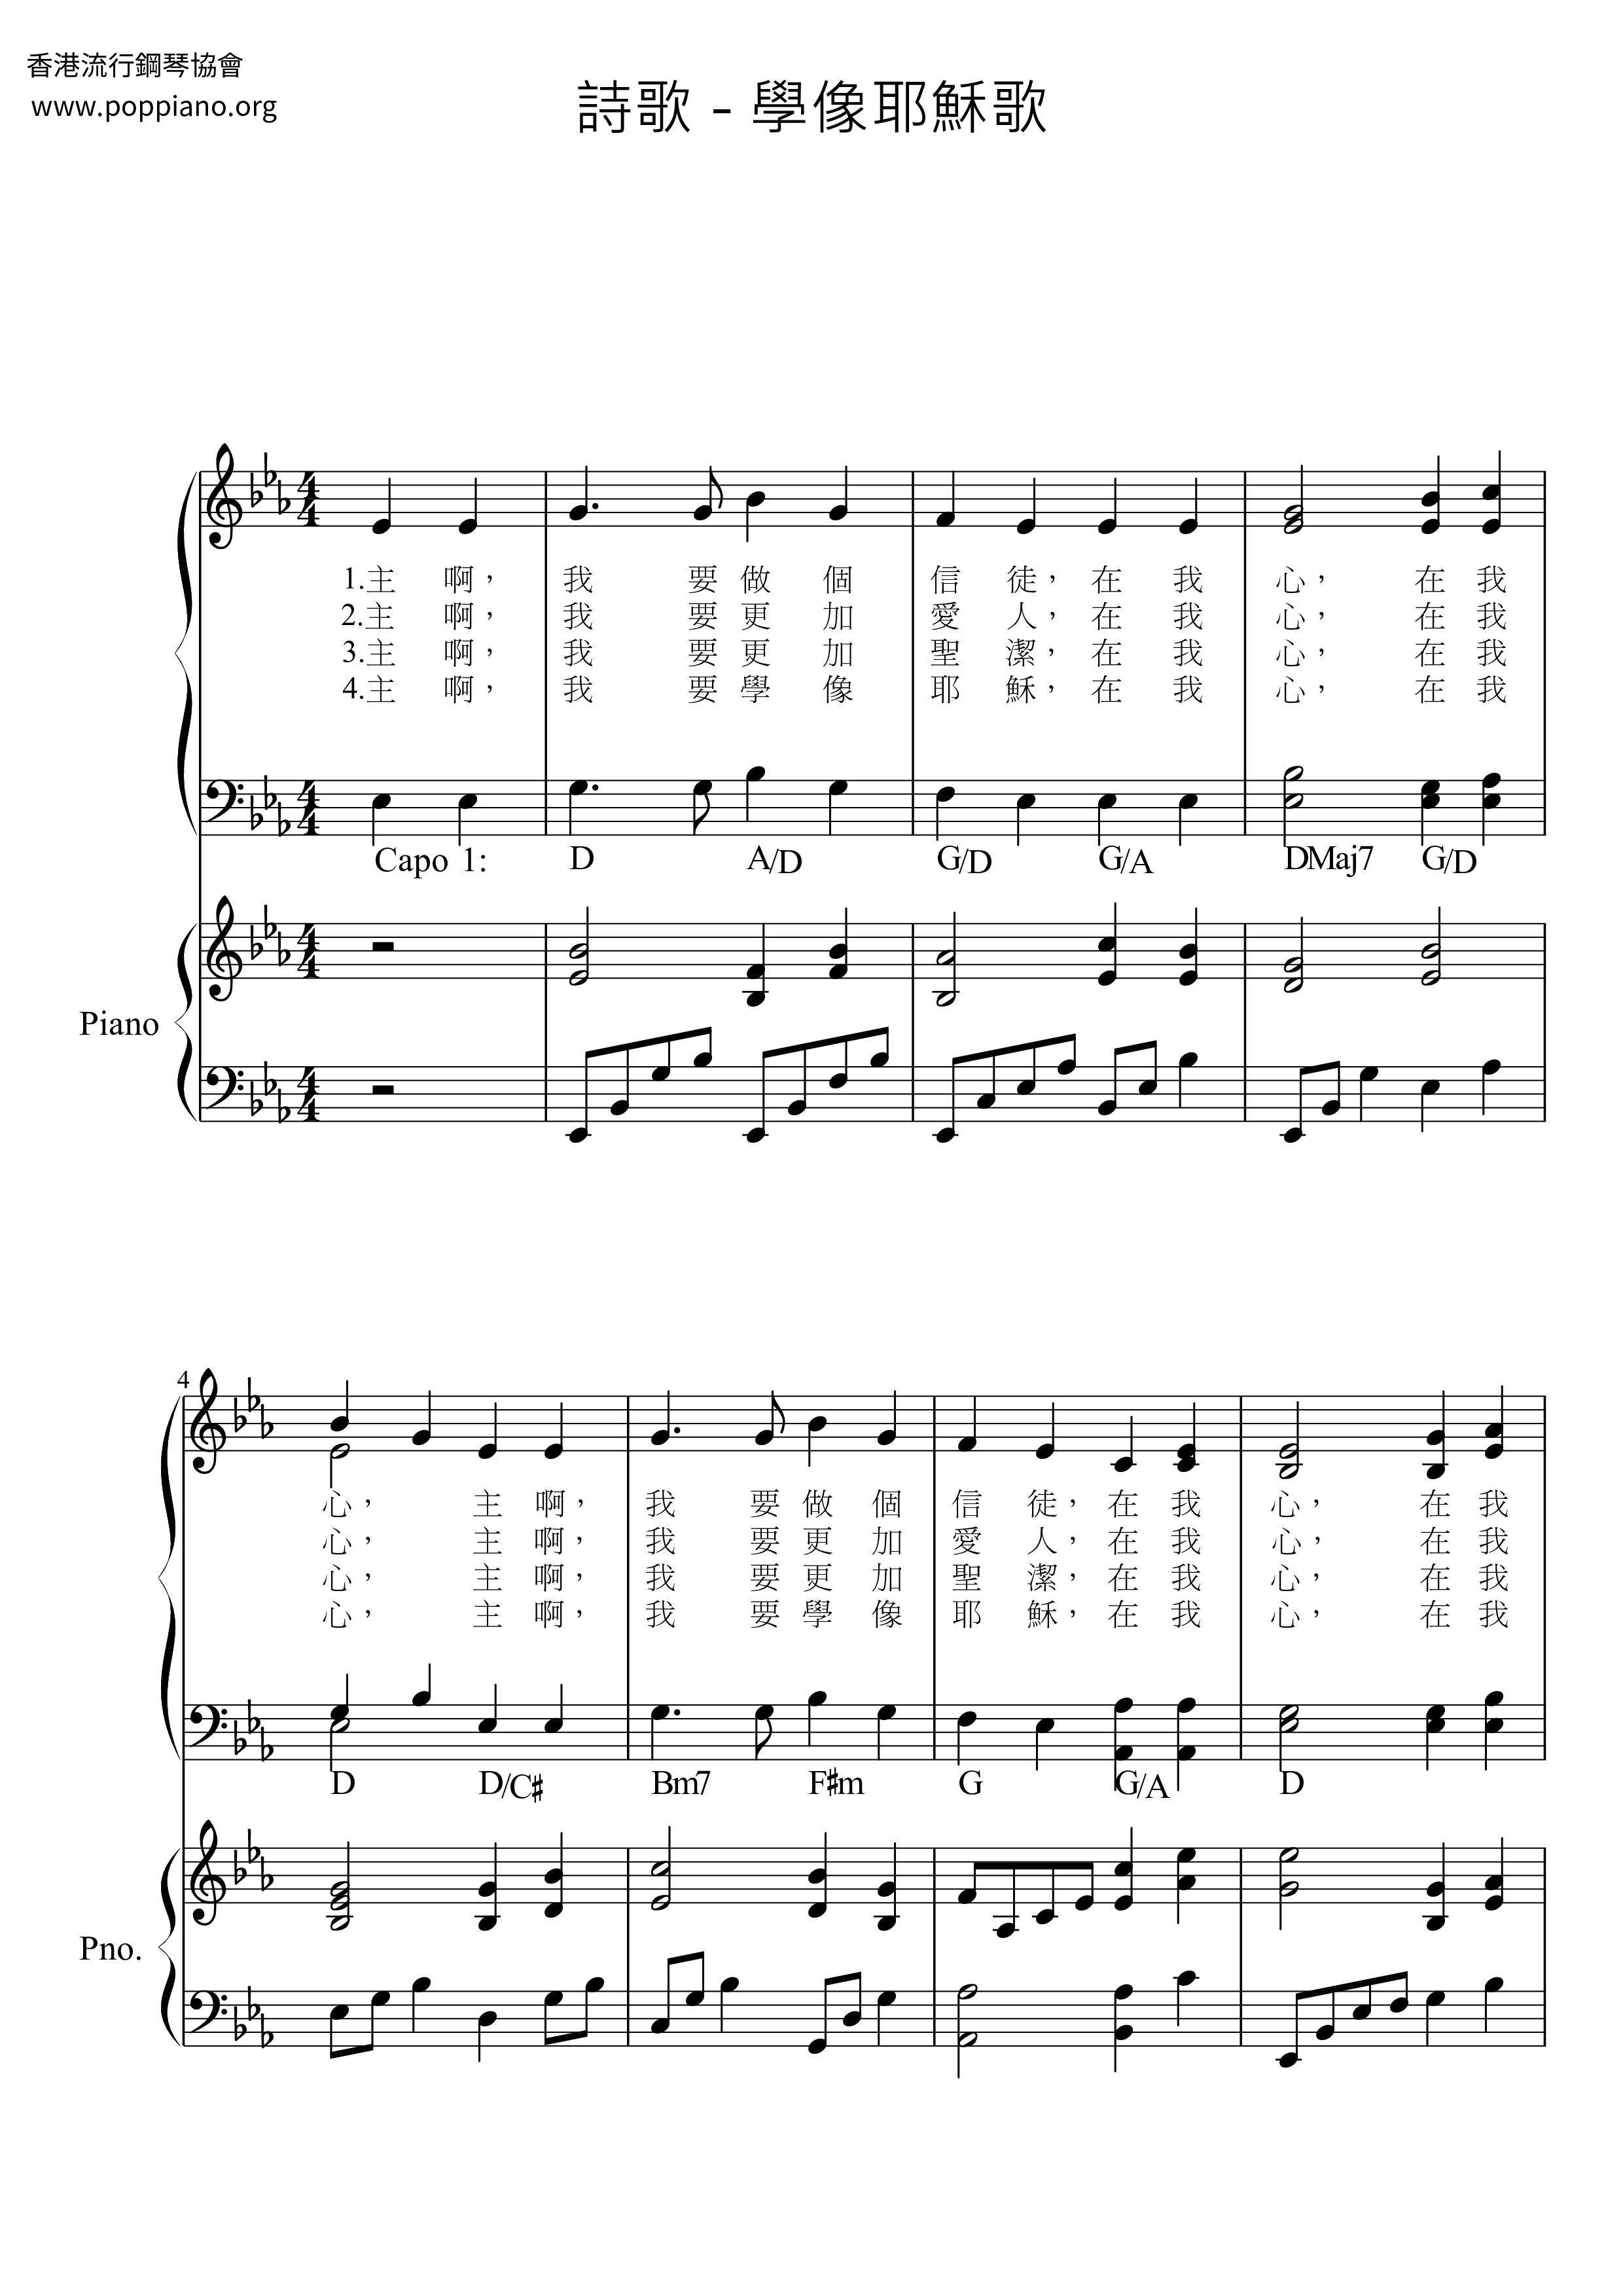 Learn To Be Like Jesus Song Score